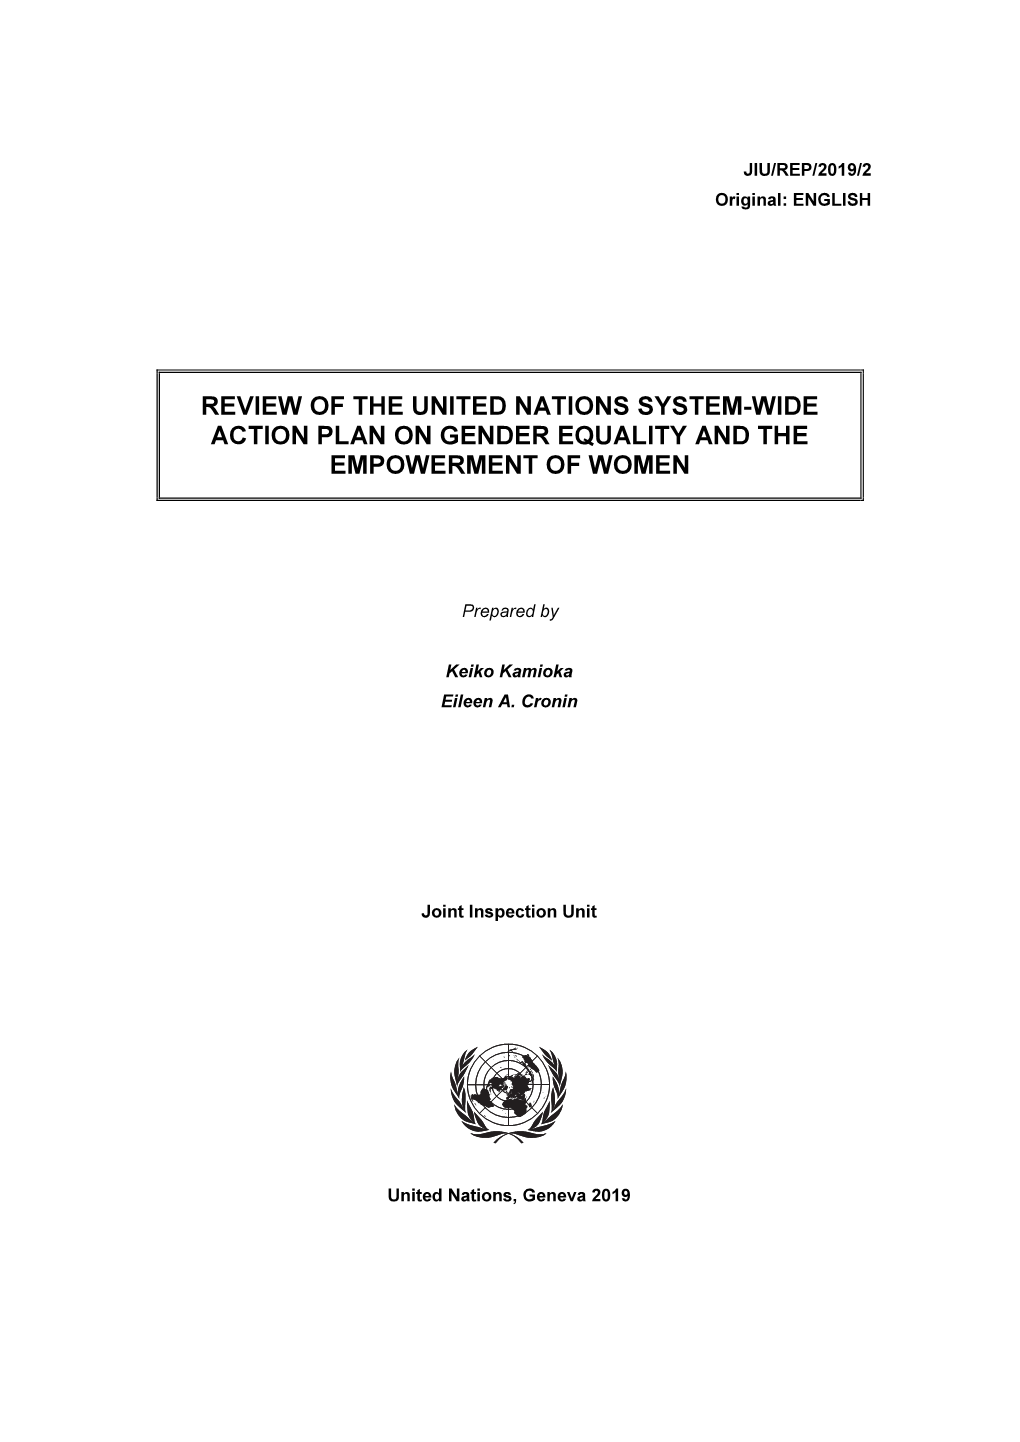 Review of the United Nations System-Wide Action Plan on Gender Equality and the Empowerment of Women